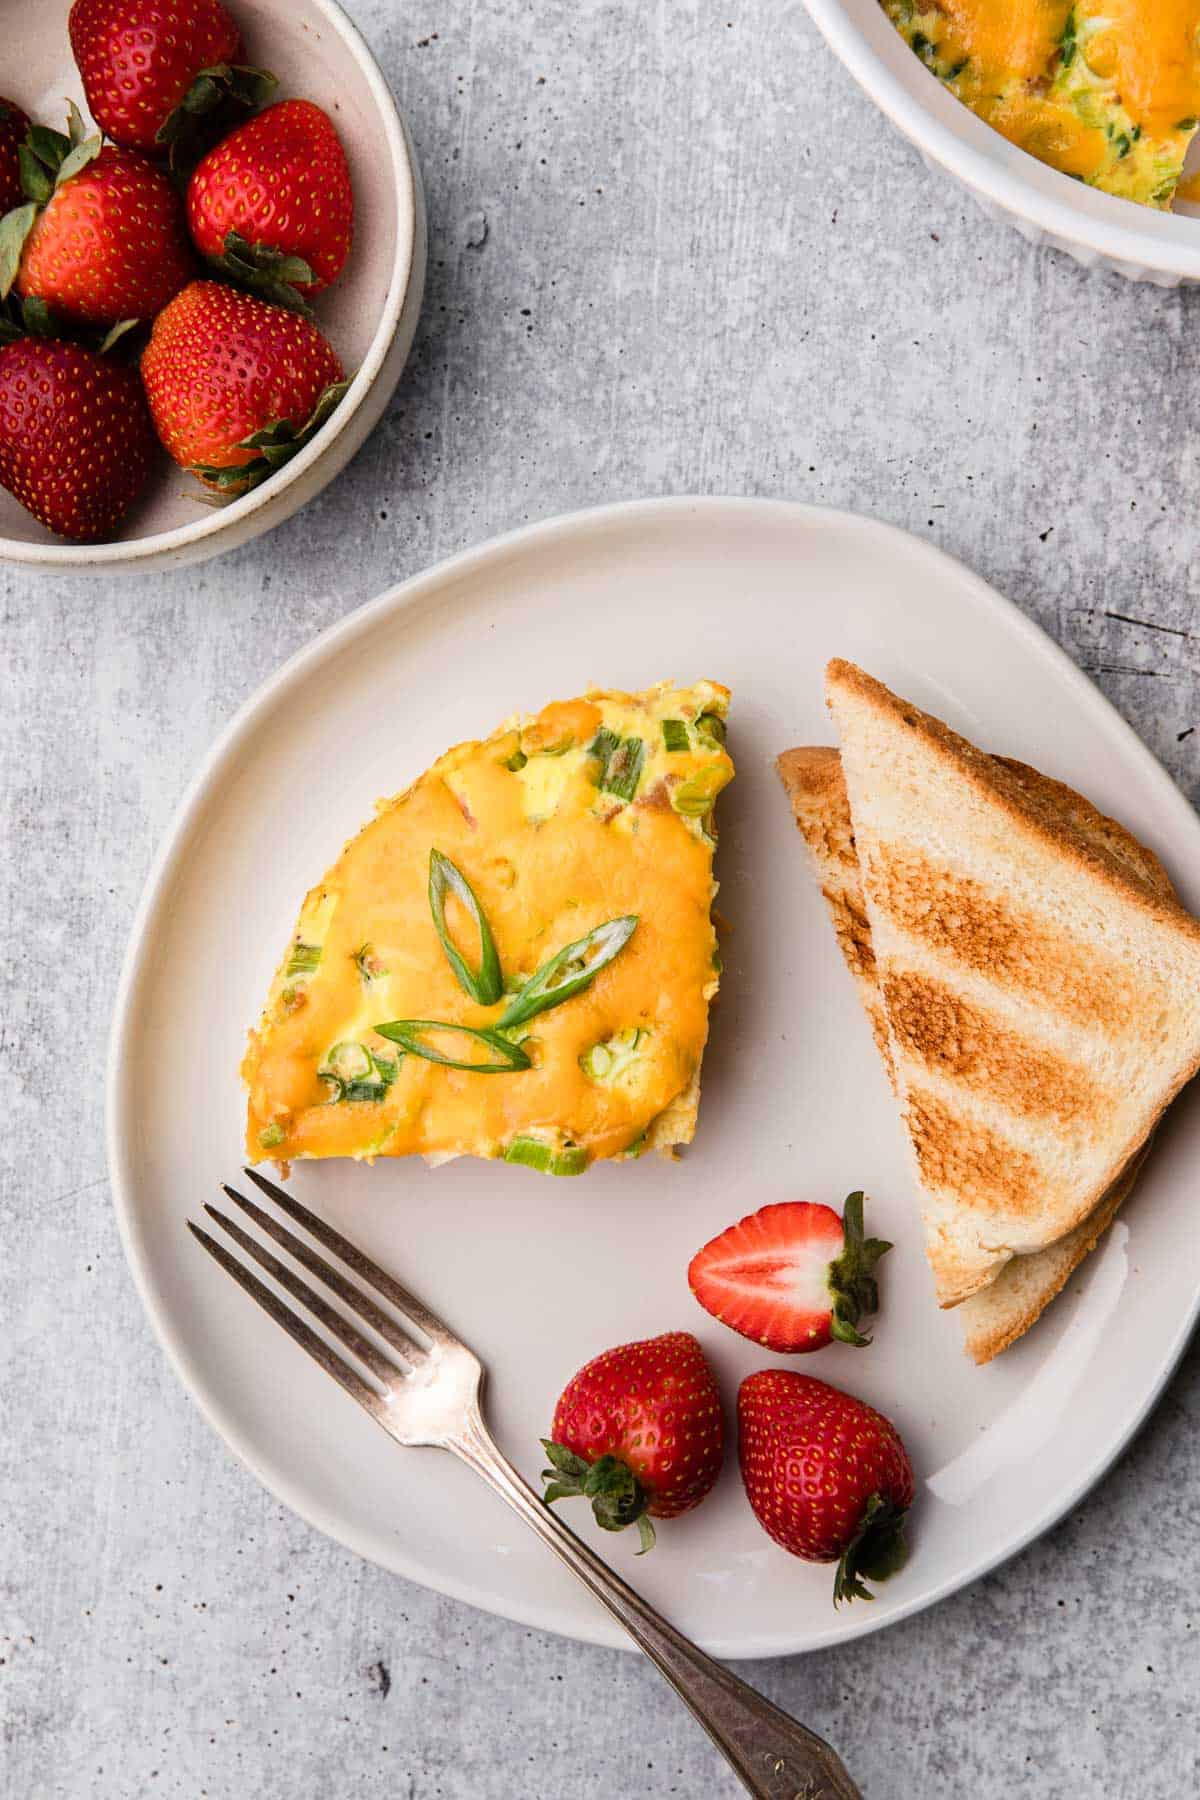 Plate with breakfast casserole, toast and strawberries.